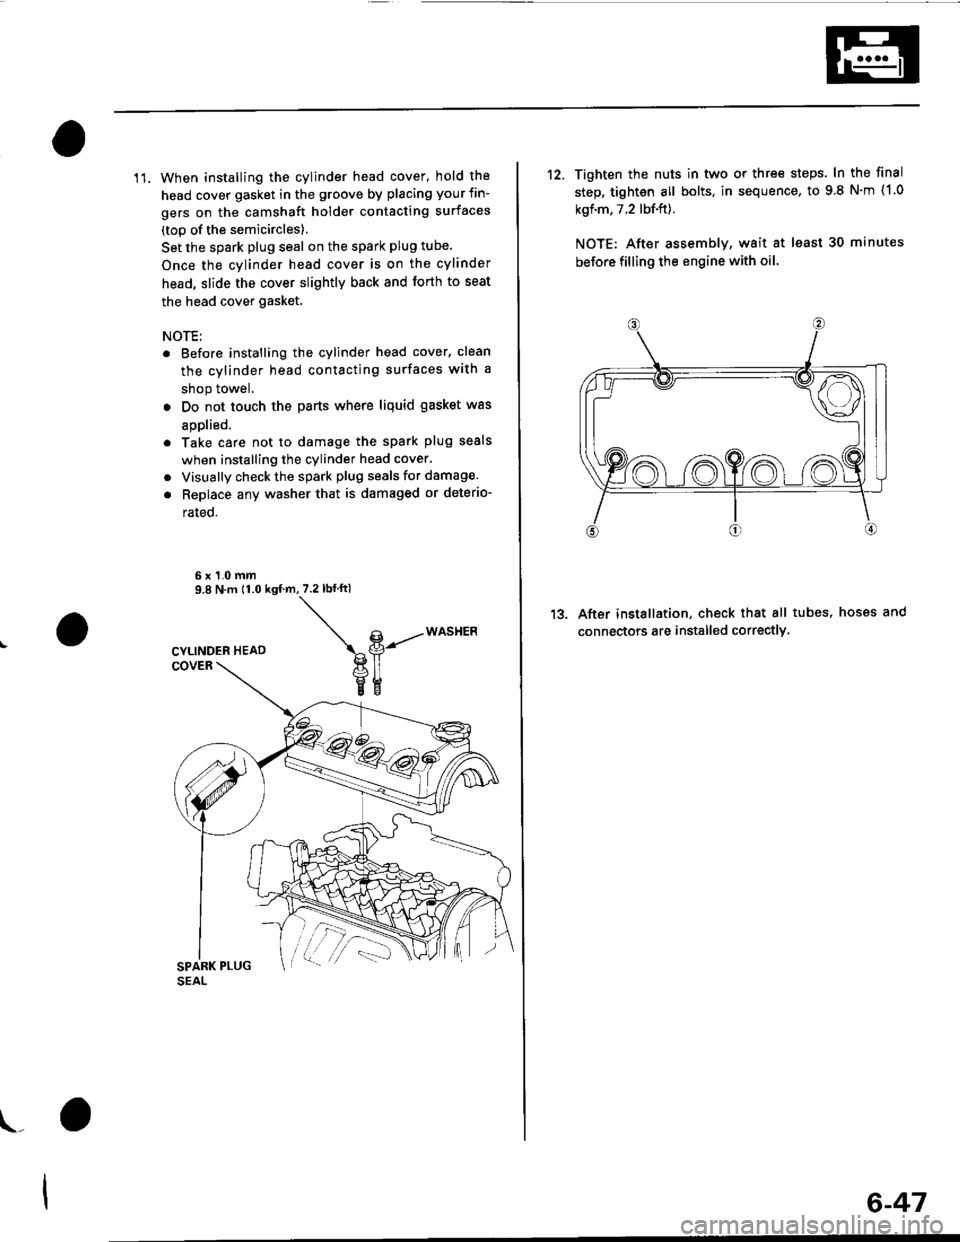 HONDA CIVIC 2000 6.G Workshop Manual 11. When installing the cylinder head cover, hold the
head cover gasket in the groove by placing your fin-
gers on the camshaft holder contacting surfaces
(top of the semicircles)
Set the spark plug s